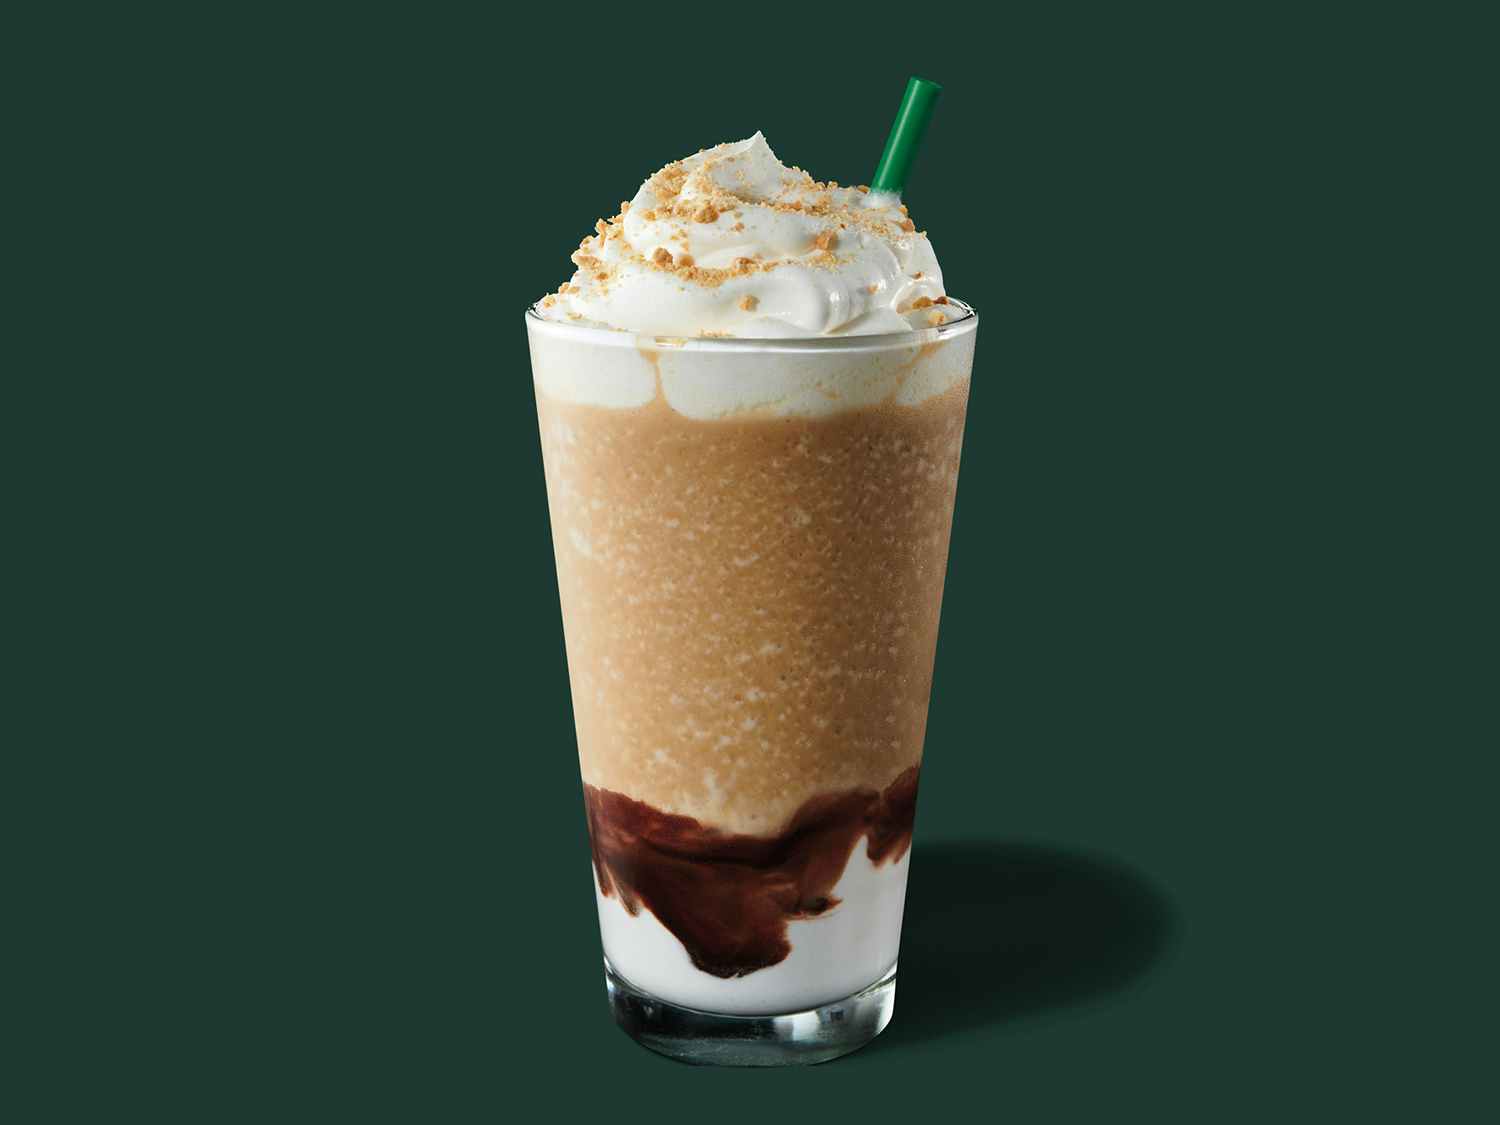 Dupe Starbucks Recipes, Save time and Money, Under £1